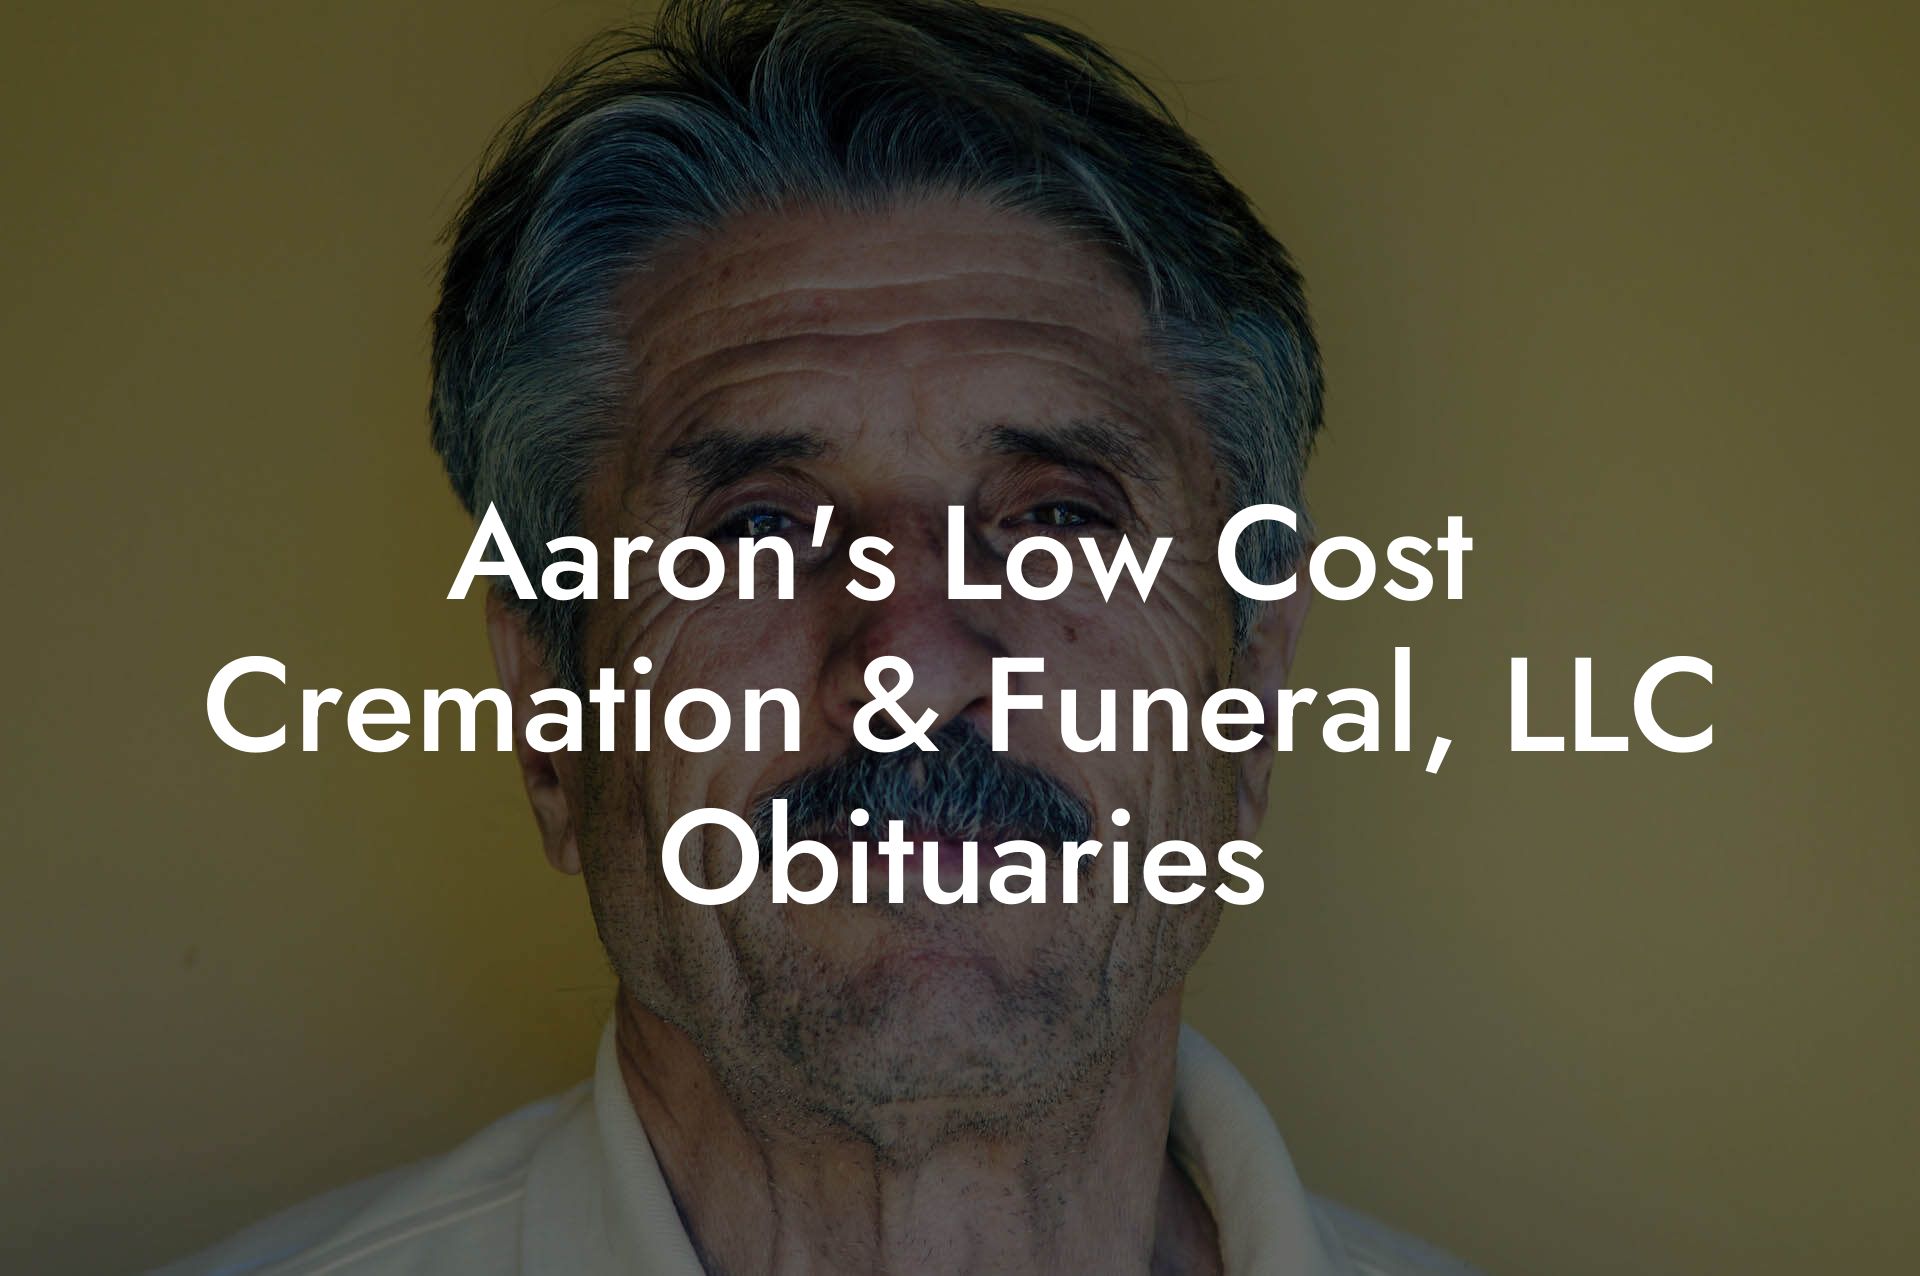 Aaron's Low Cost Cremation & Funeral, LLC Obituaries